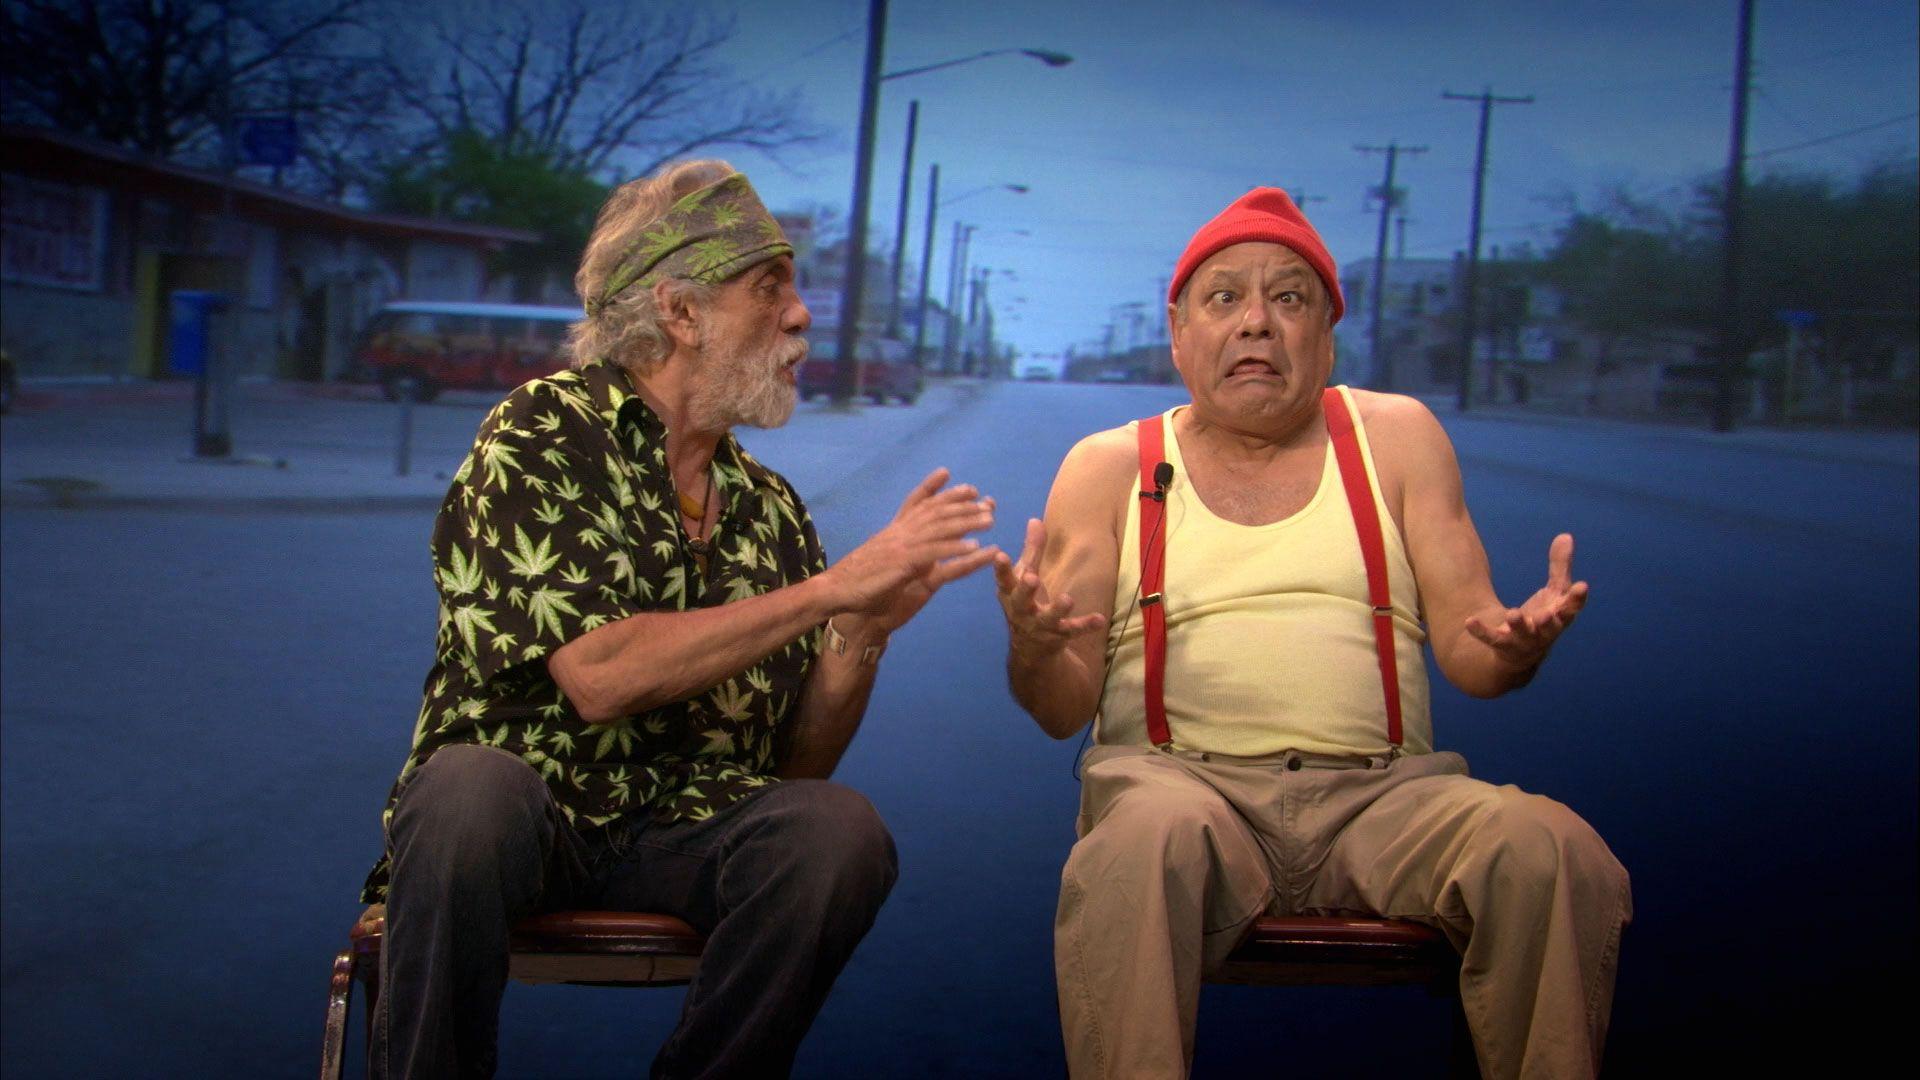 With tenor, maker of gif keyboard, add popular cheech and chong joint anima...